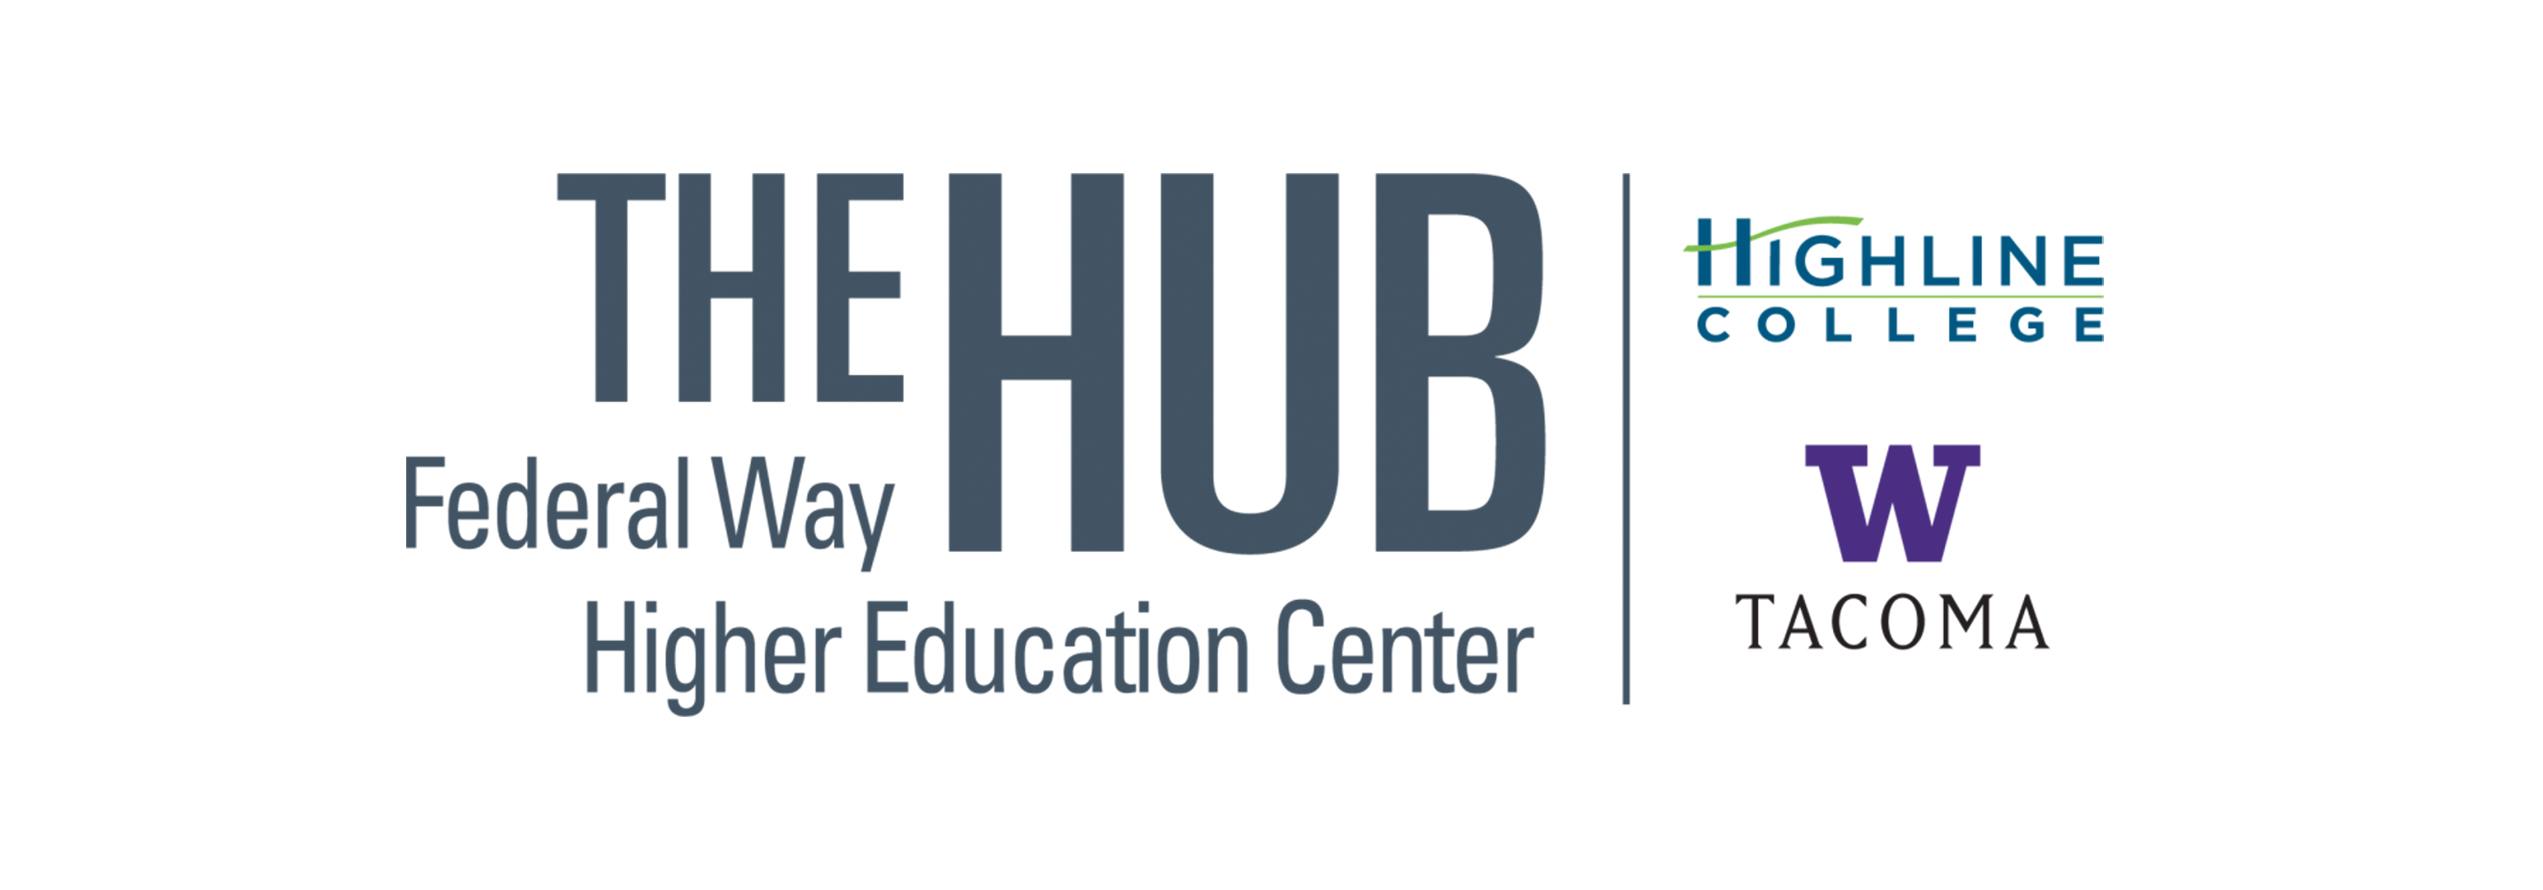 Higher Education is in Federal Way! Connection. Access. Convenience.